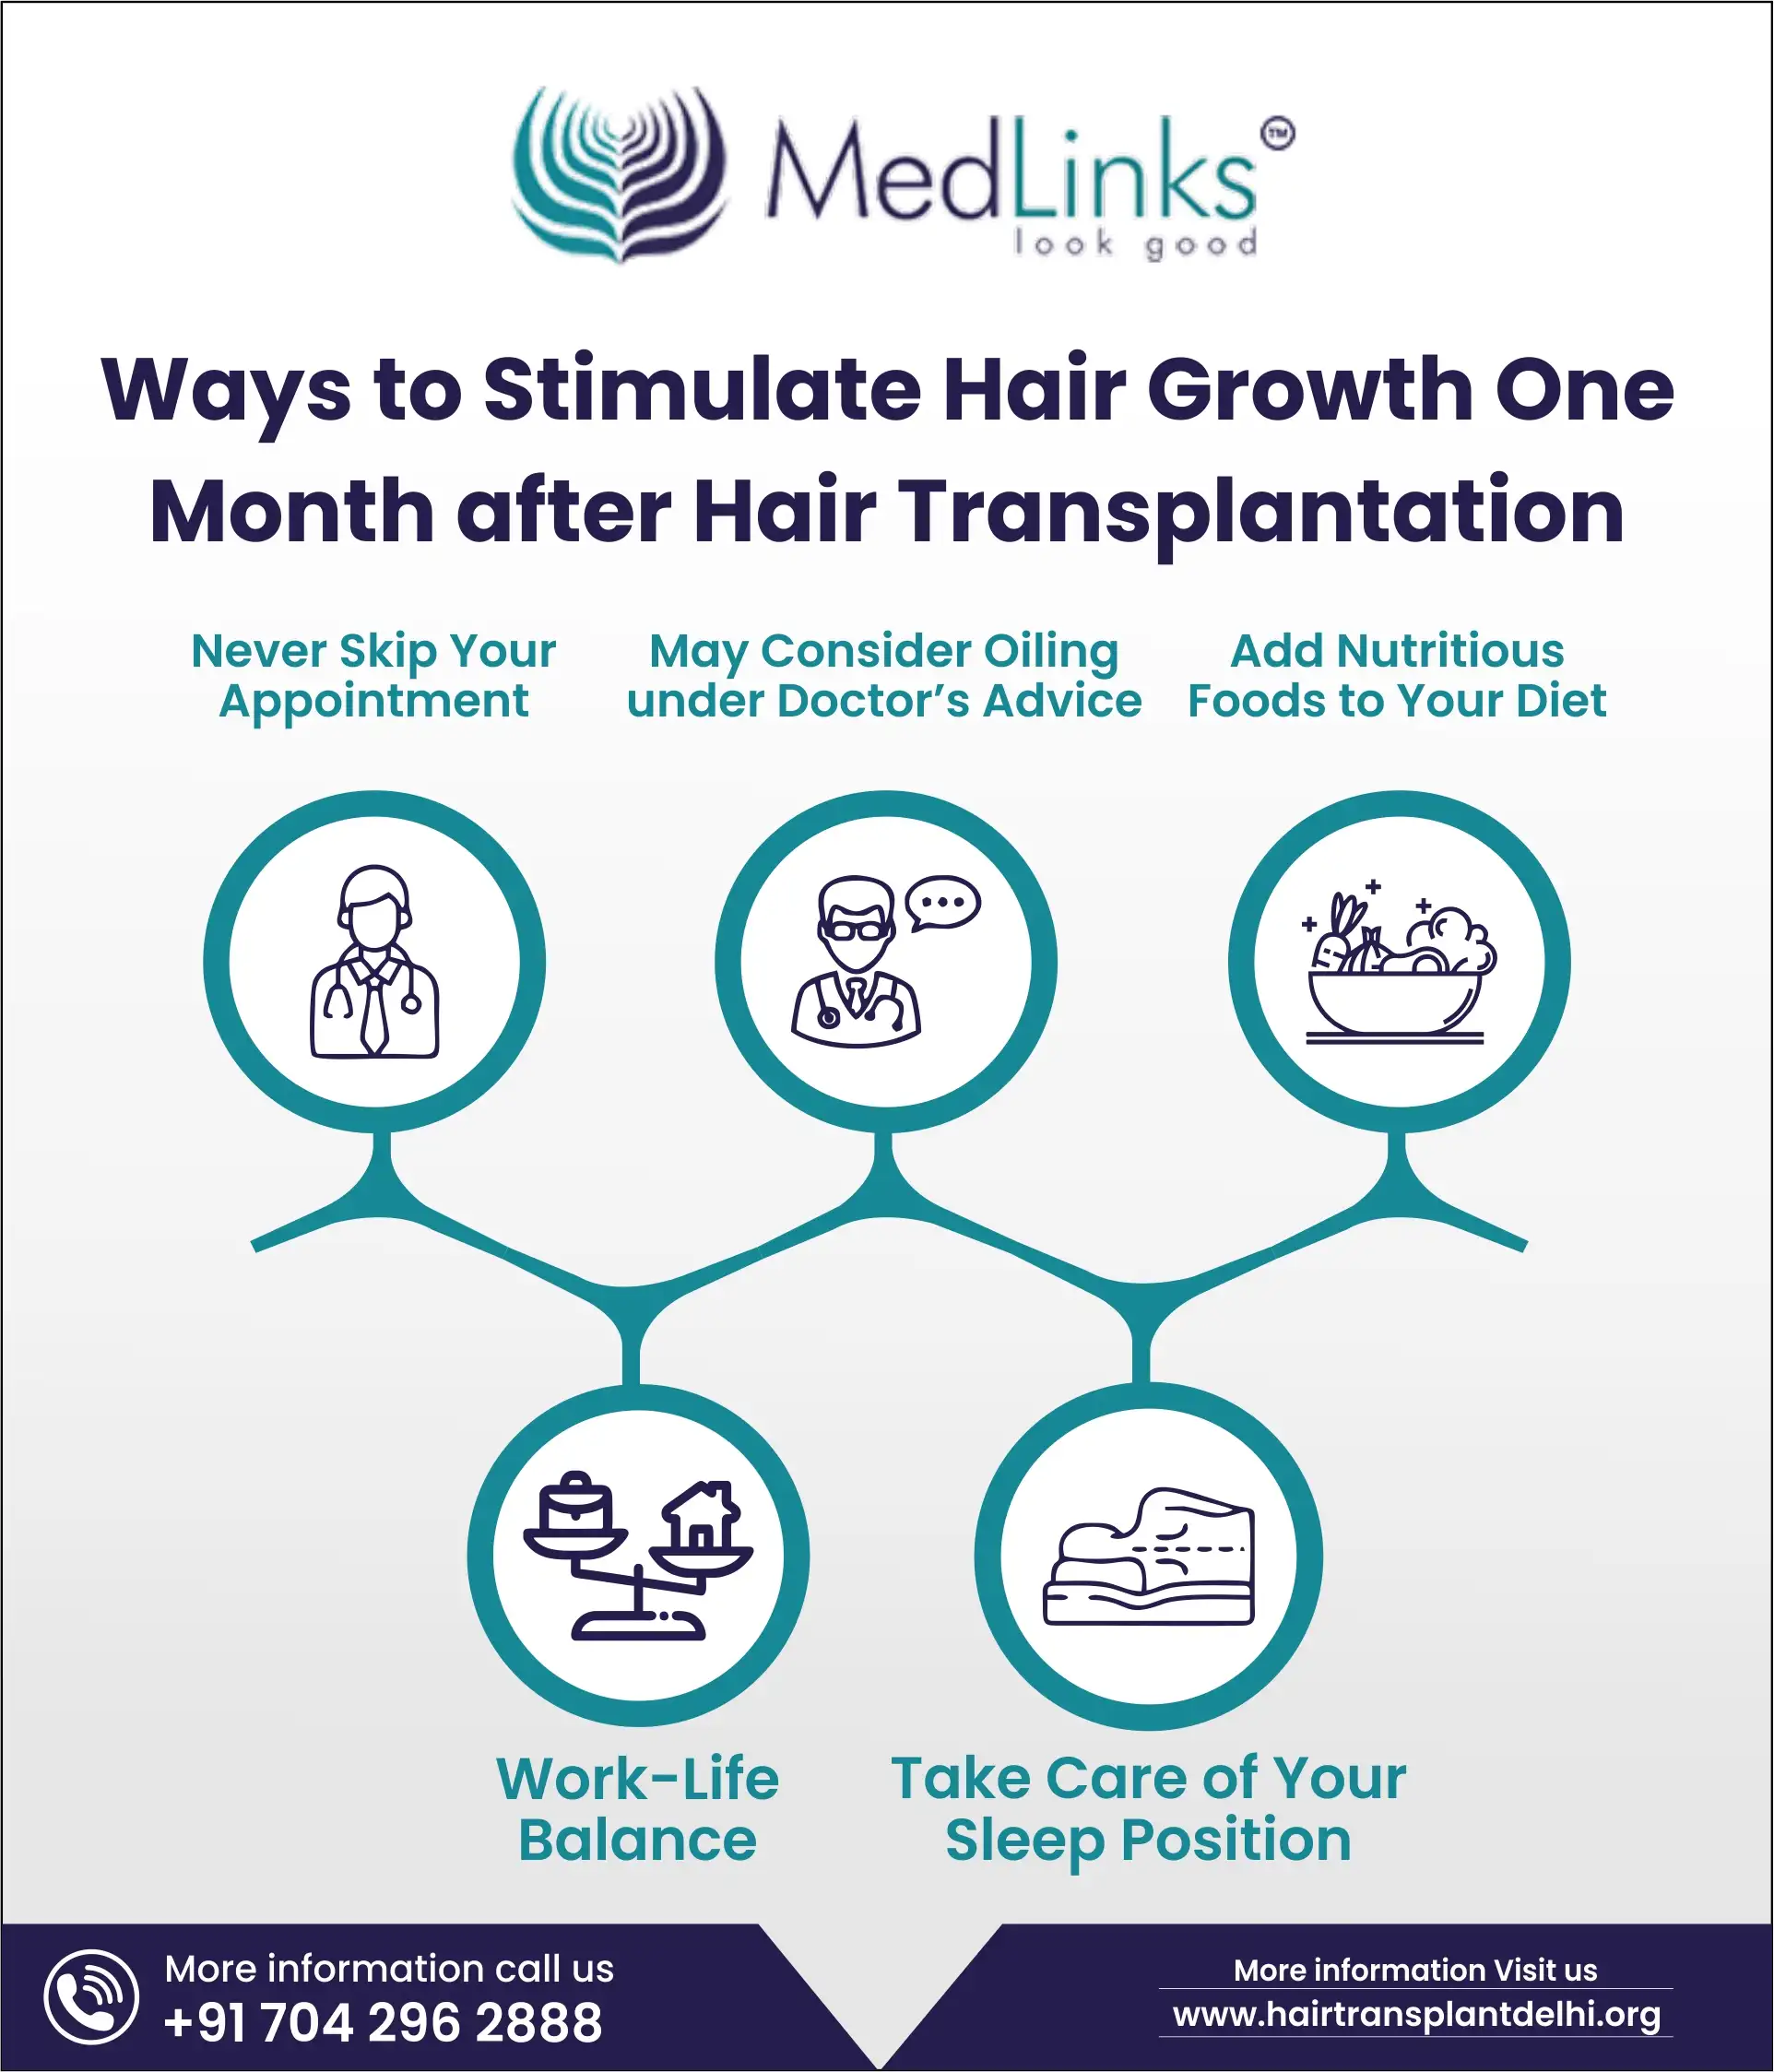 speed-up-your-hair-growth-after-one-month-of-hair-restoration